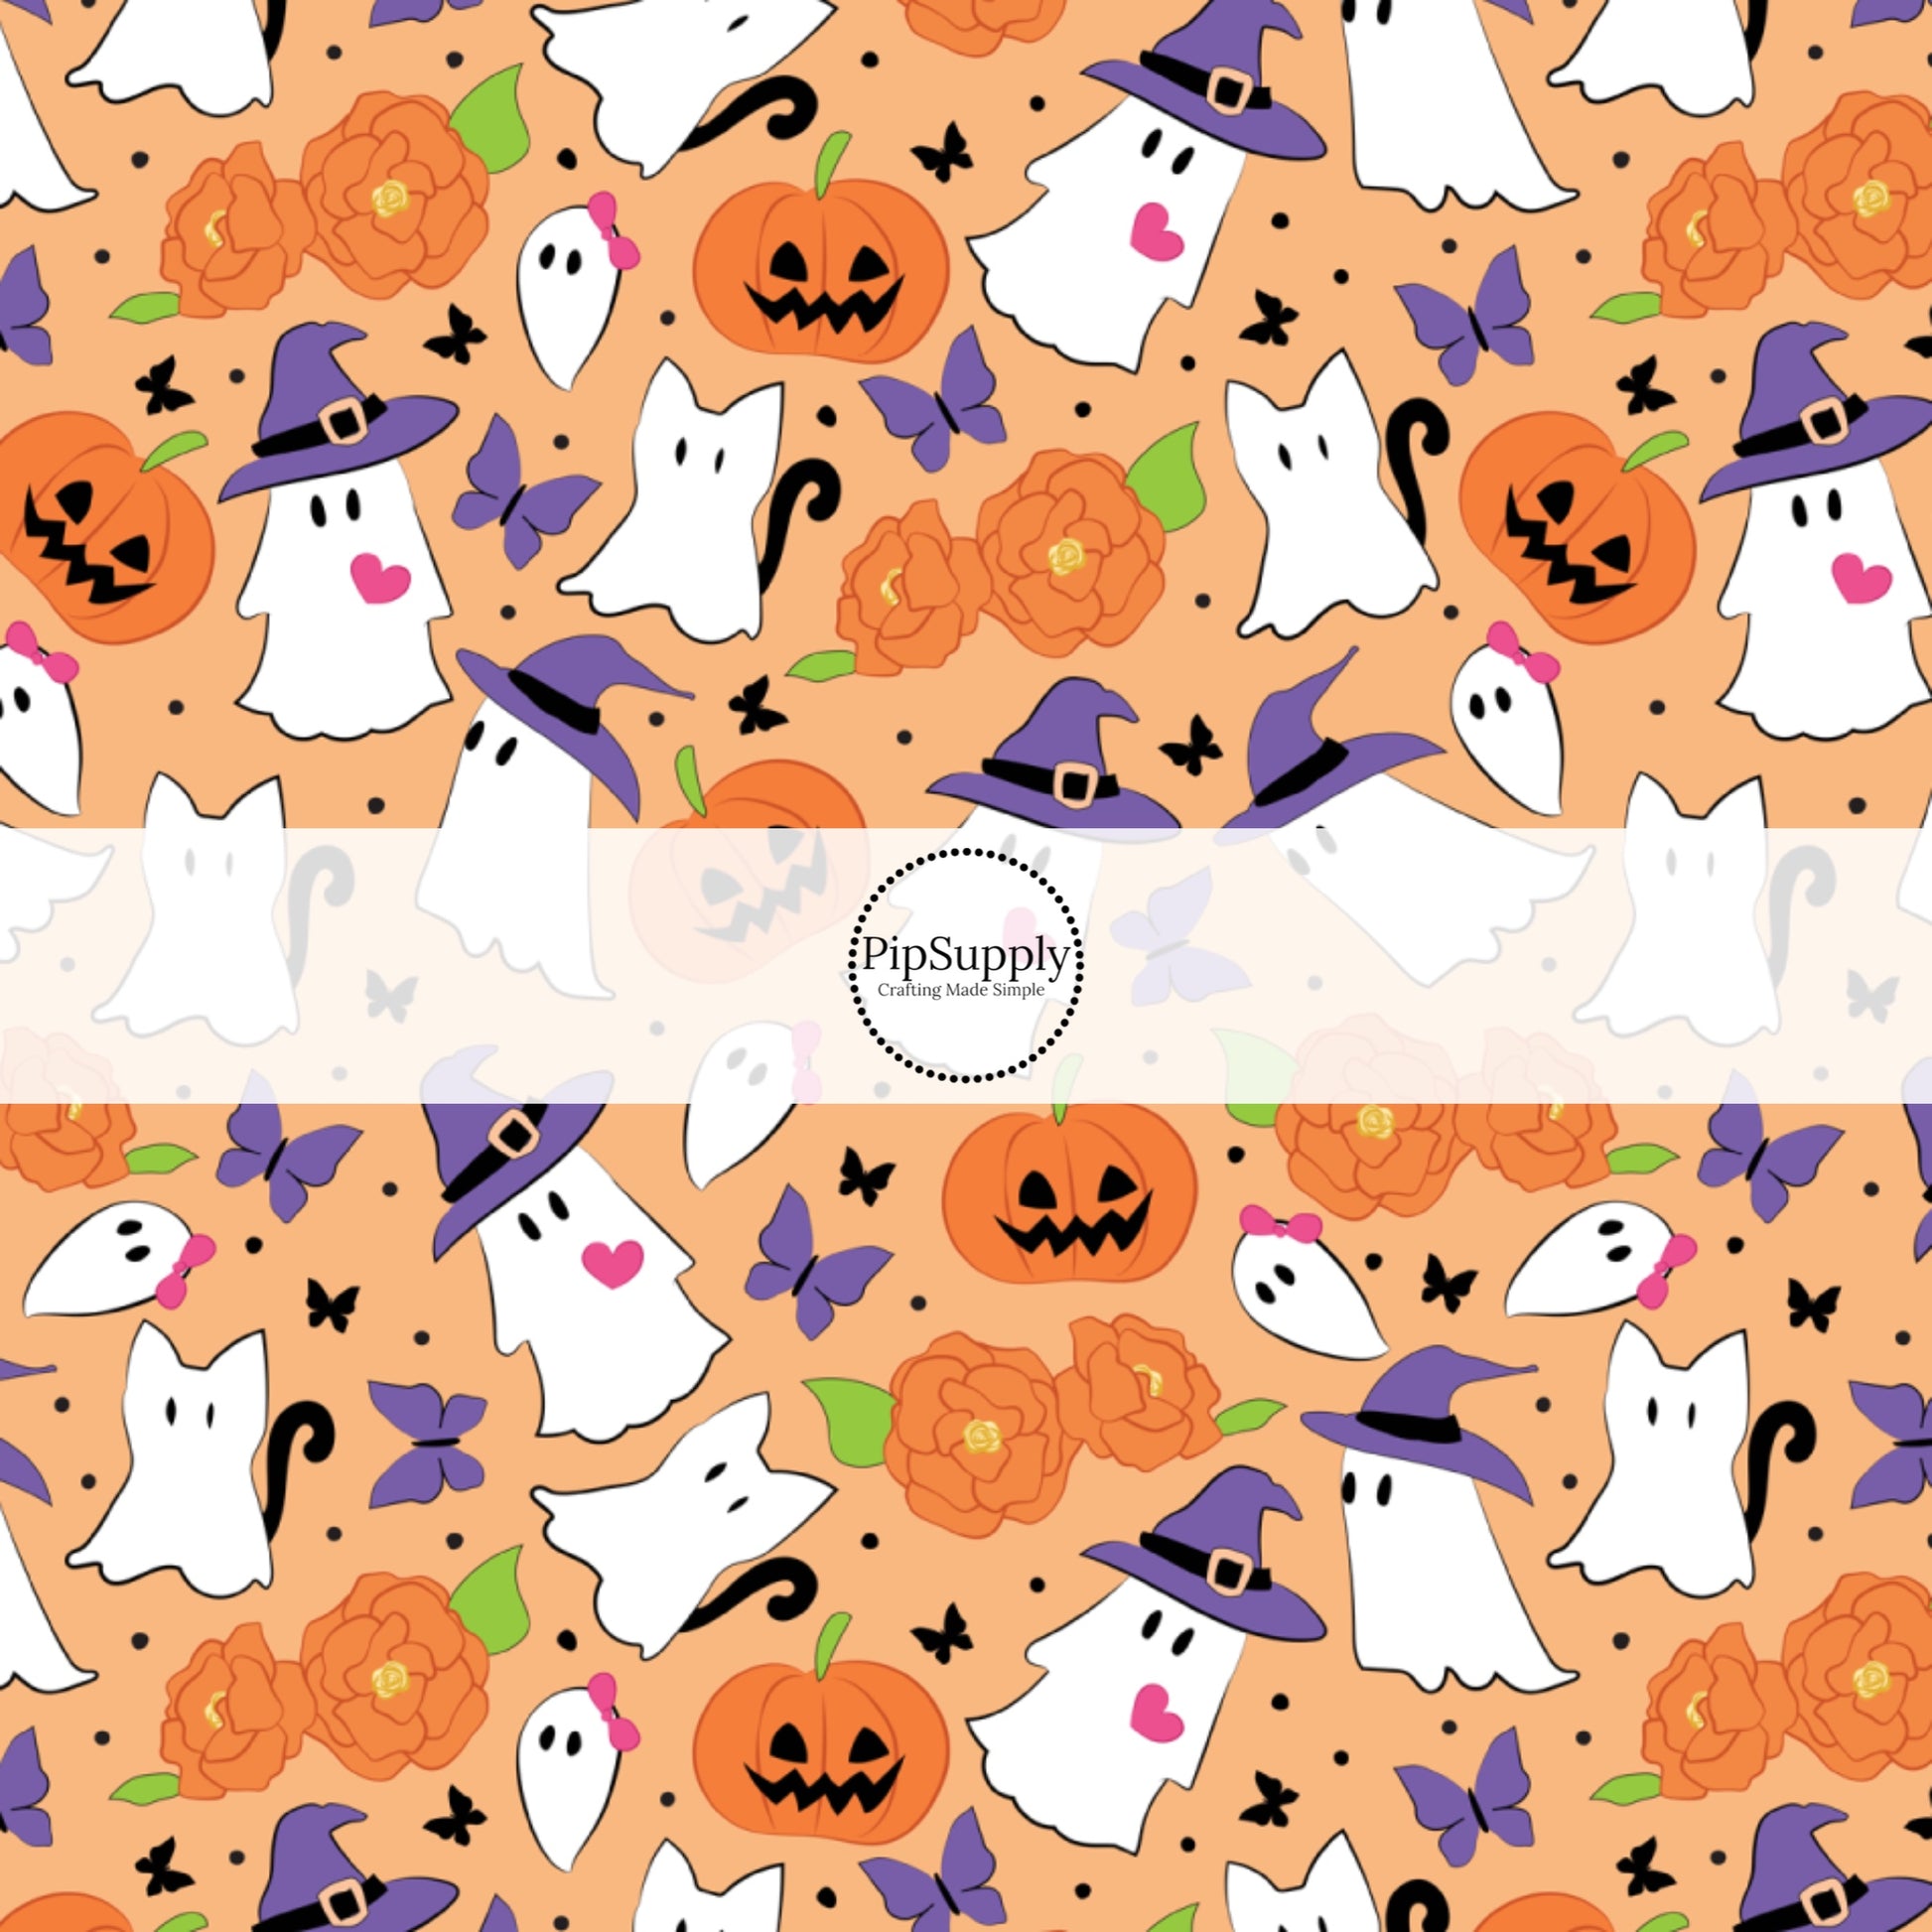 These Halloween themed orange fabric by the yard features ghost creatures, pumpkins, flowers, and purple and black butterflies on orange. This fun spooky themed fabric can be used for all your sewing and crafting needs! 